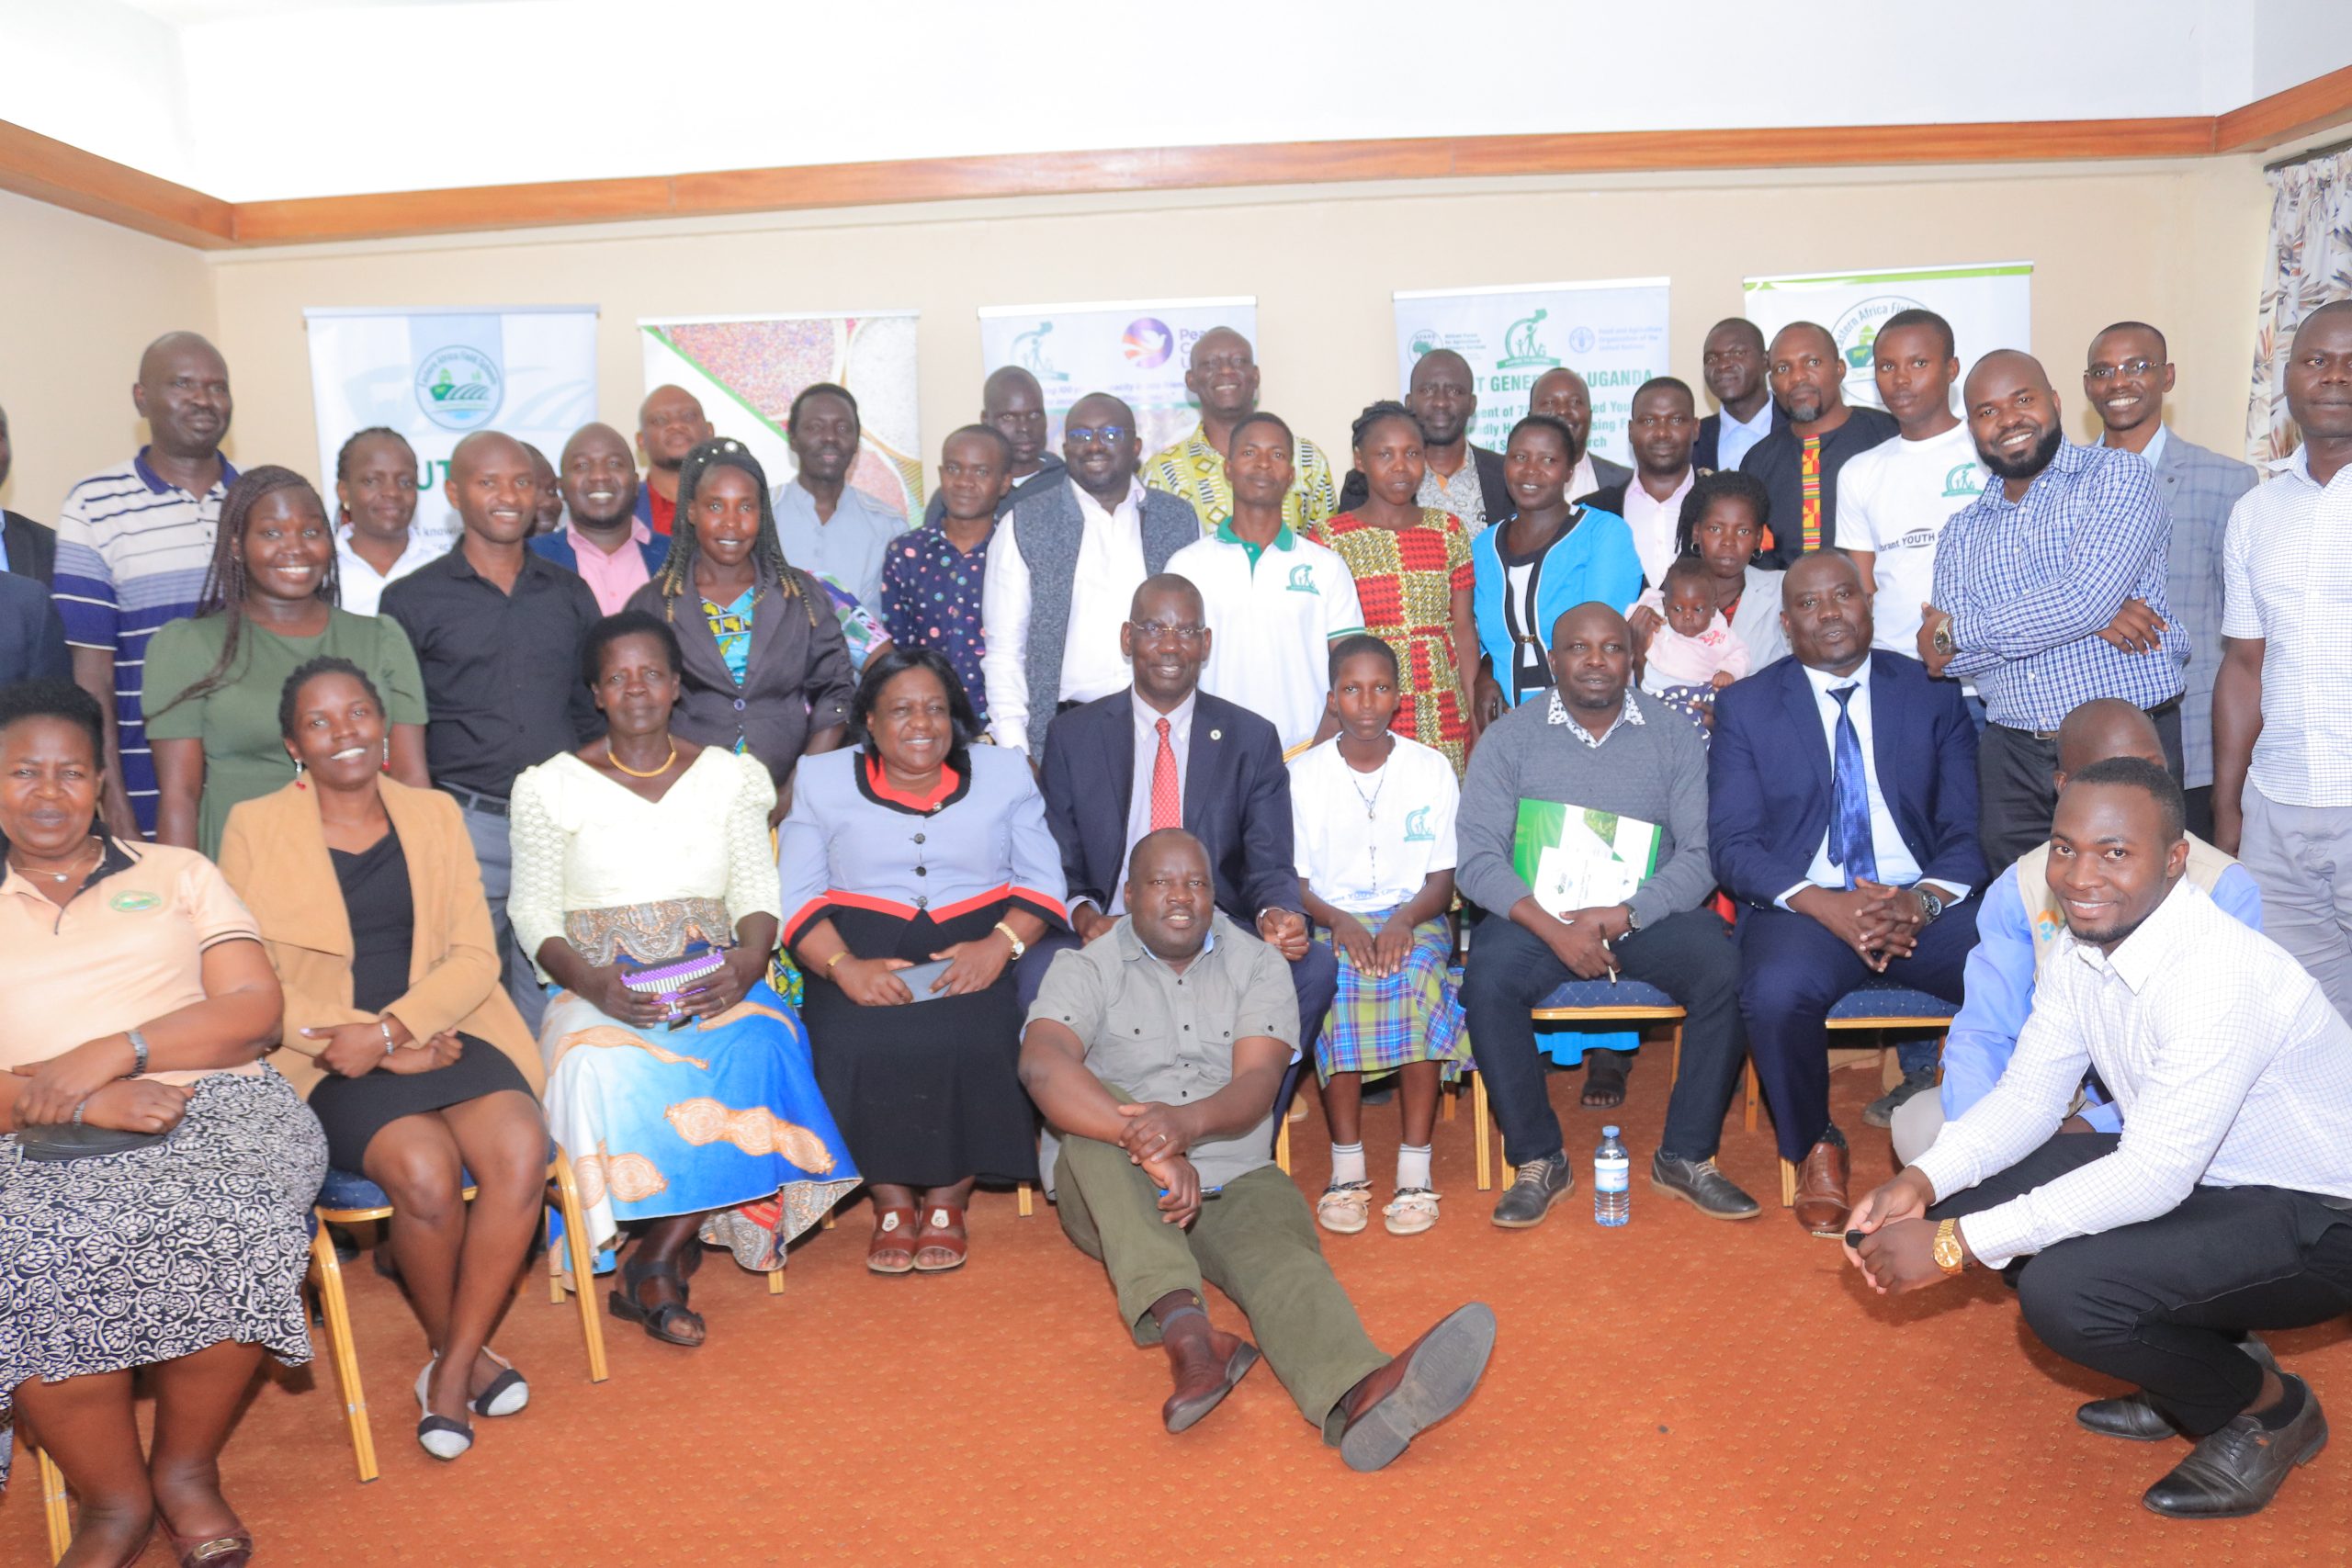 Participants at the National Policy Dialogue on Field schools in Uganda